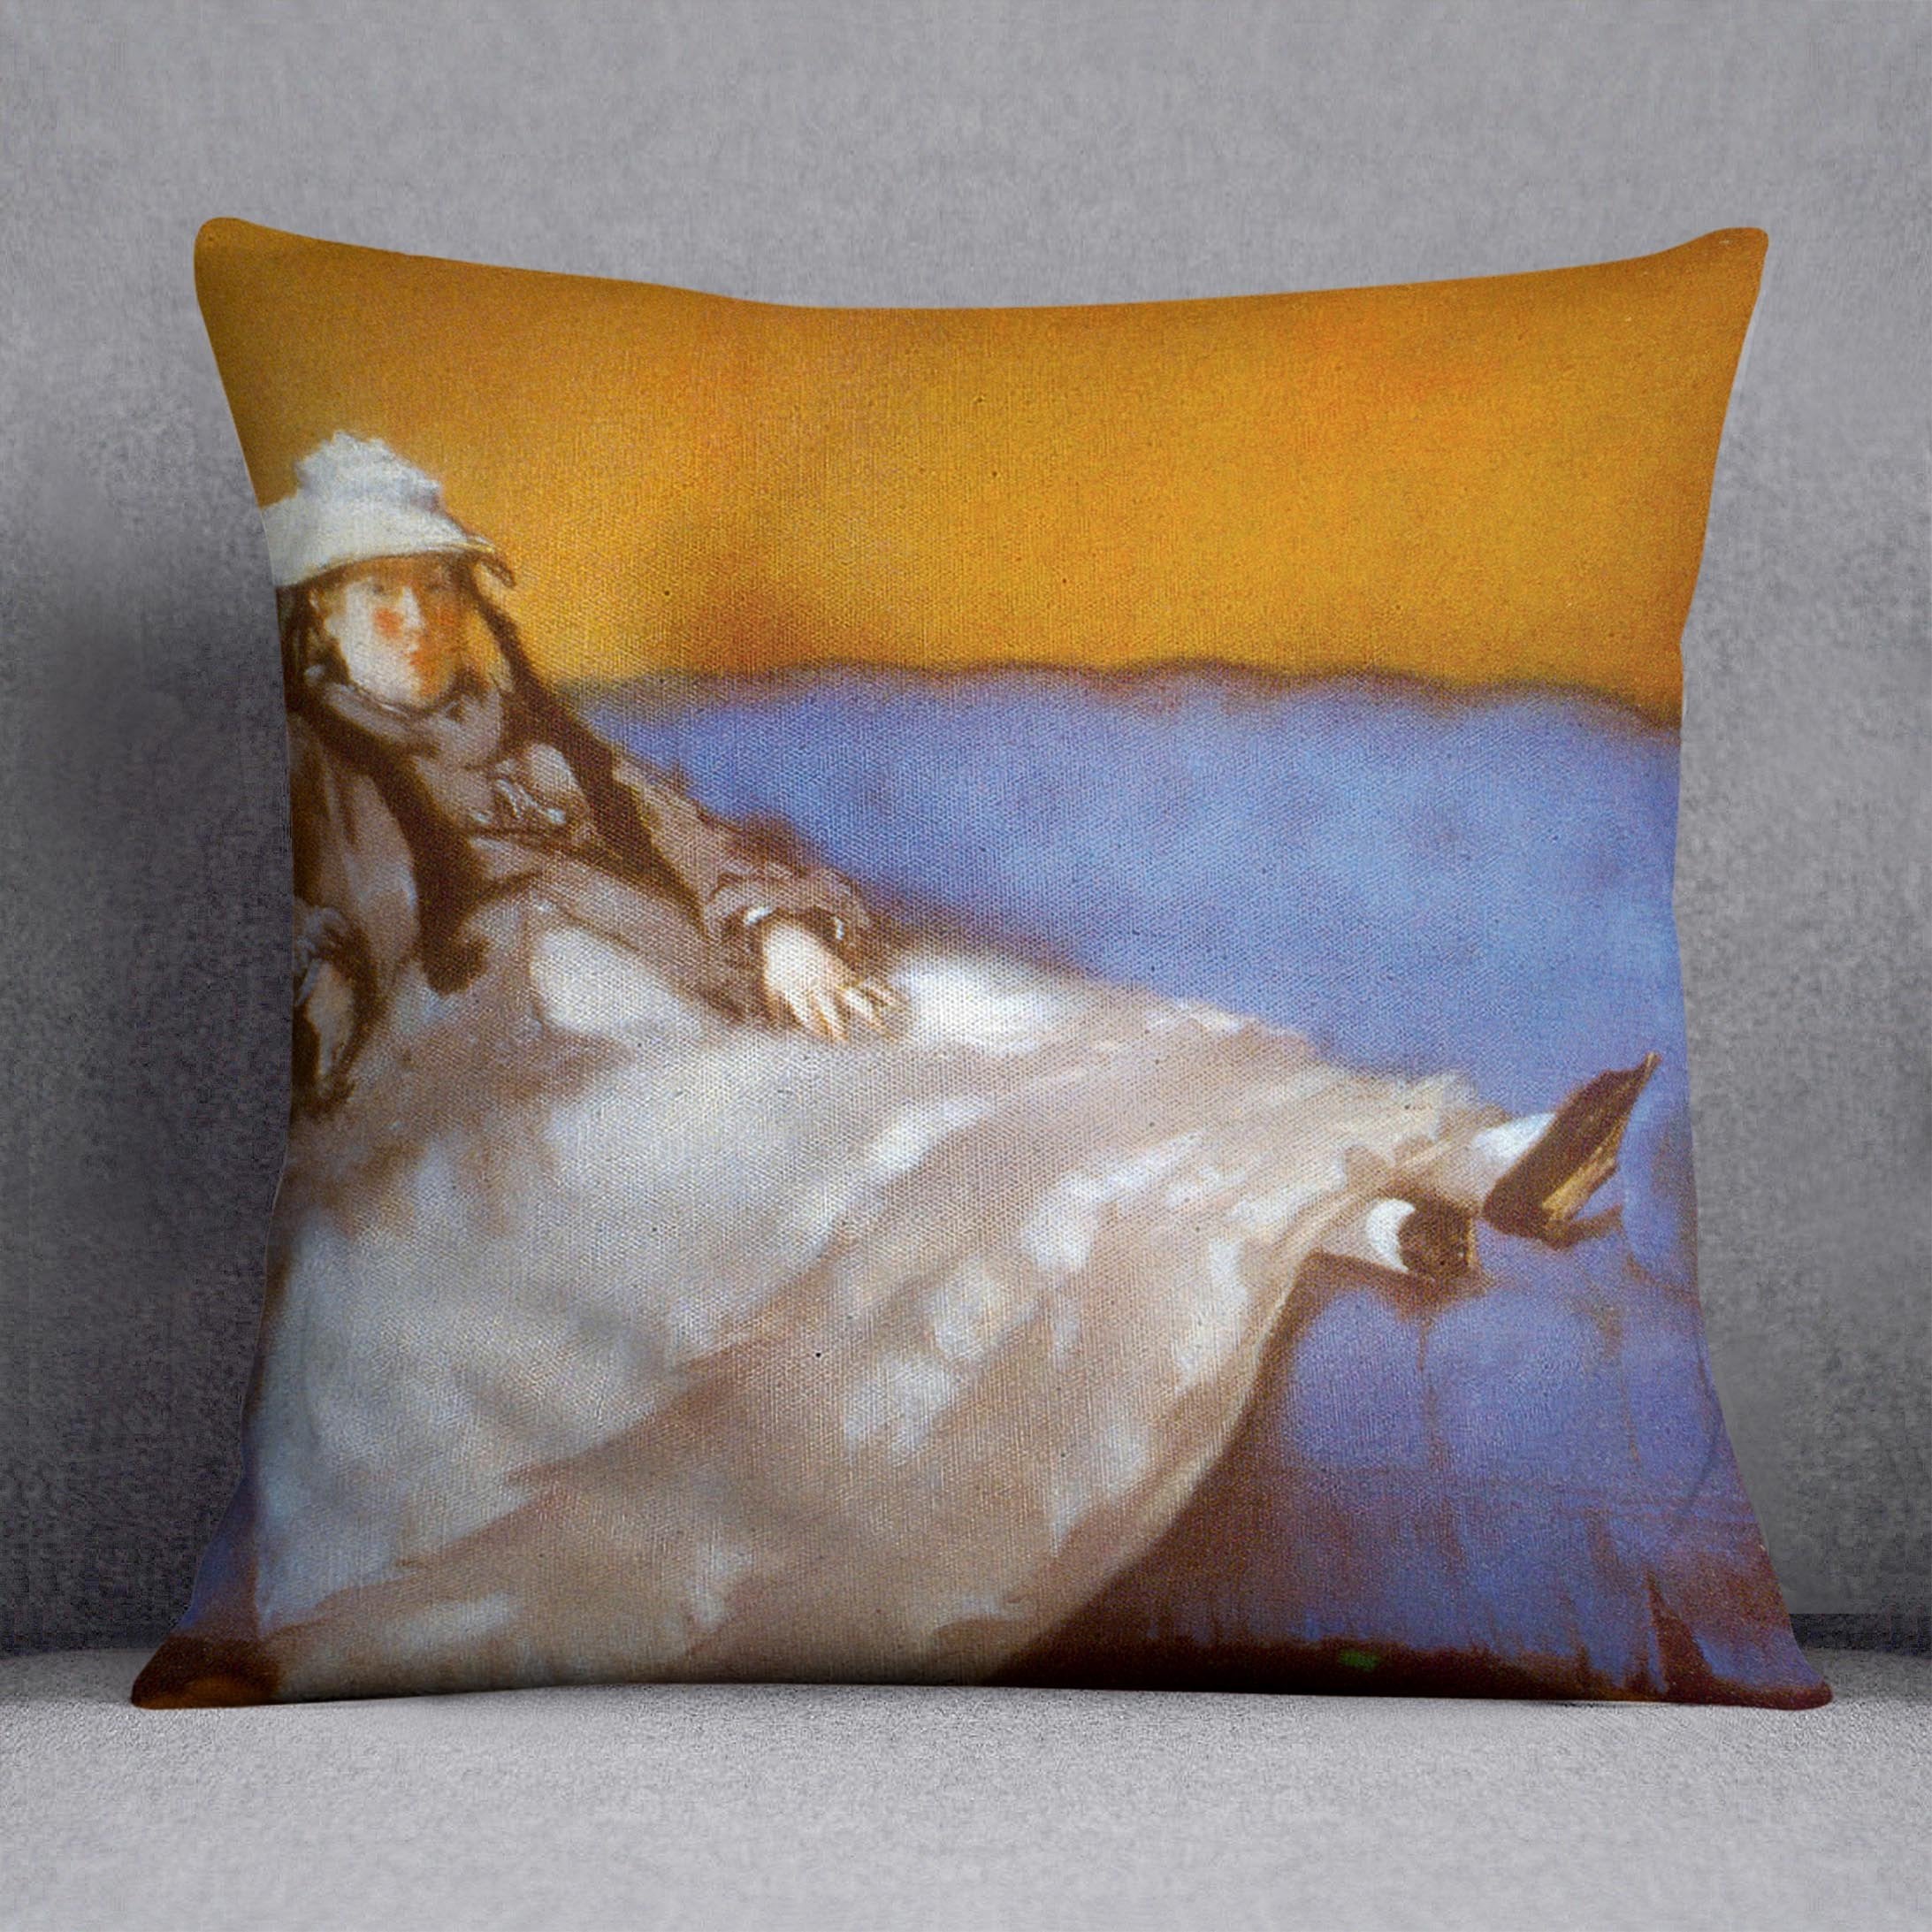 Madame Manet by Manet Throw Pillow